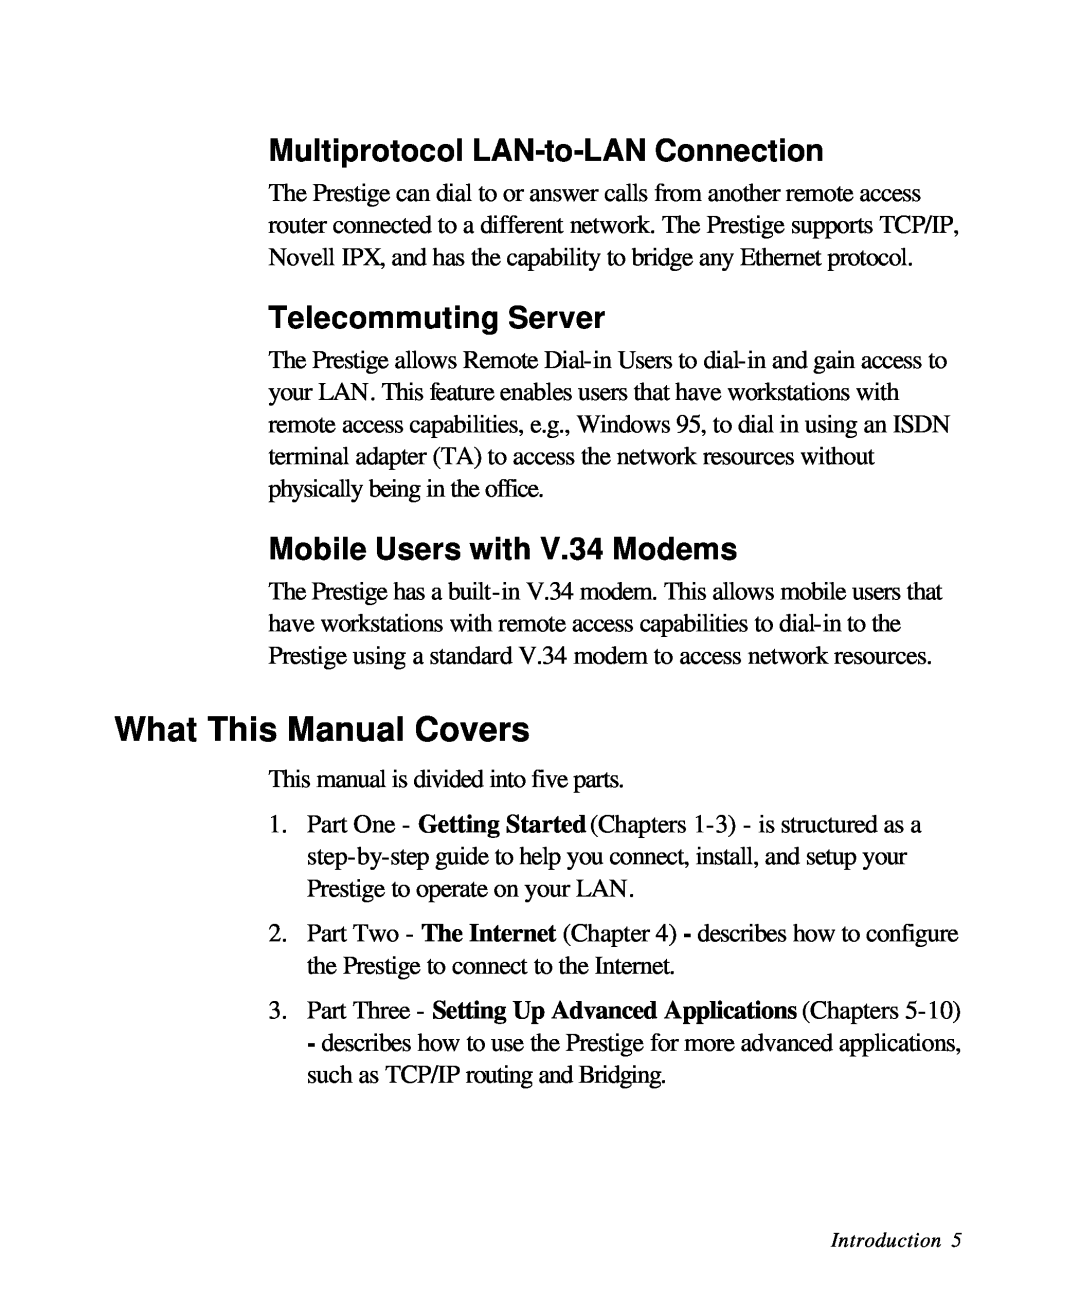 ZyXEL Communications 28641 user manual What This Manual Covers, Multiprotocol LAN-to-LAN Connection, Telecommuting Server 